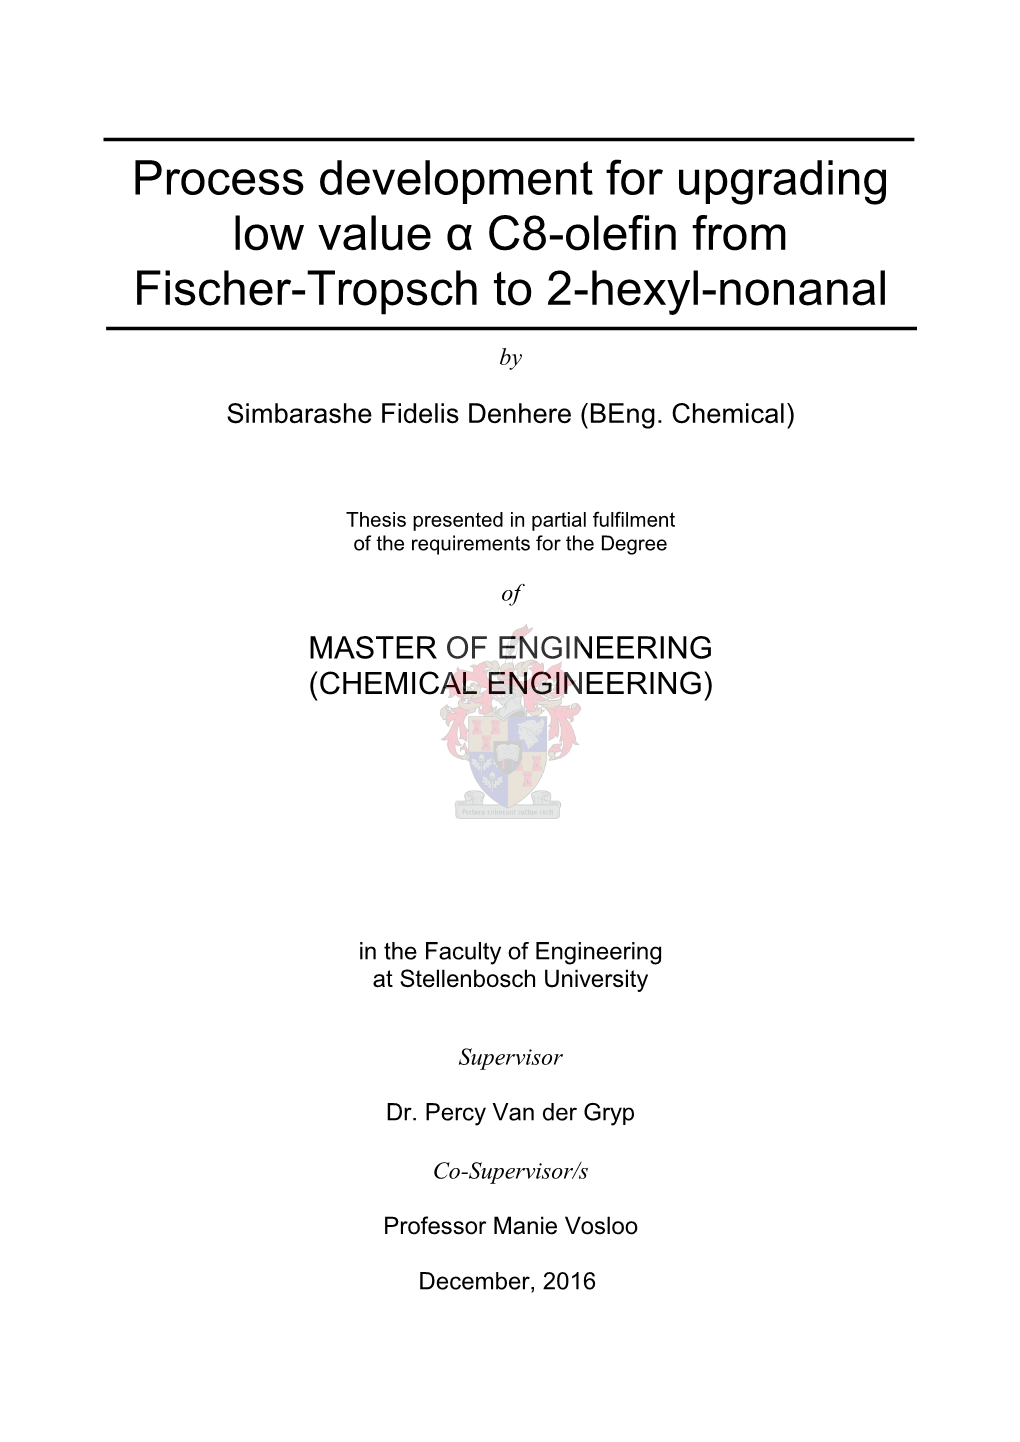 Process Development for Upgrading Low Value Α C8-Olefin from Fischer-Tropsch to 2-Hexyl-Nonanal